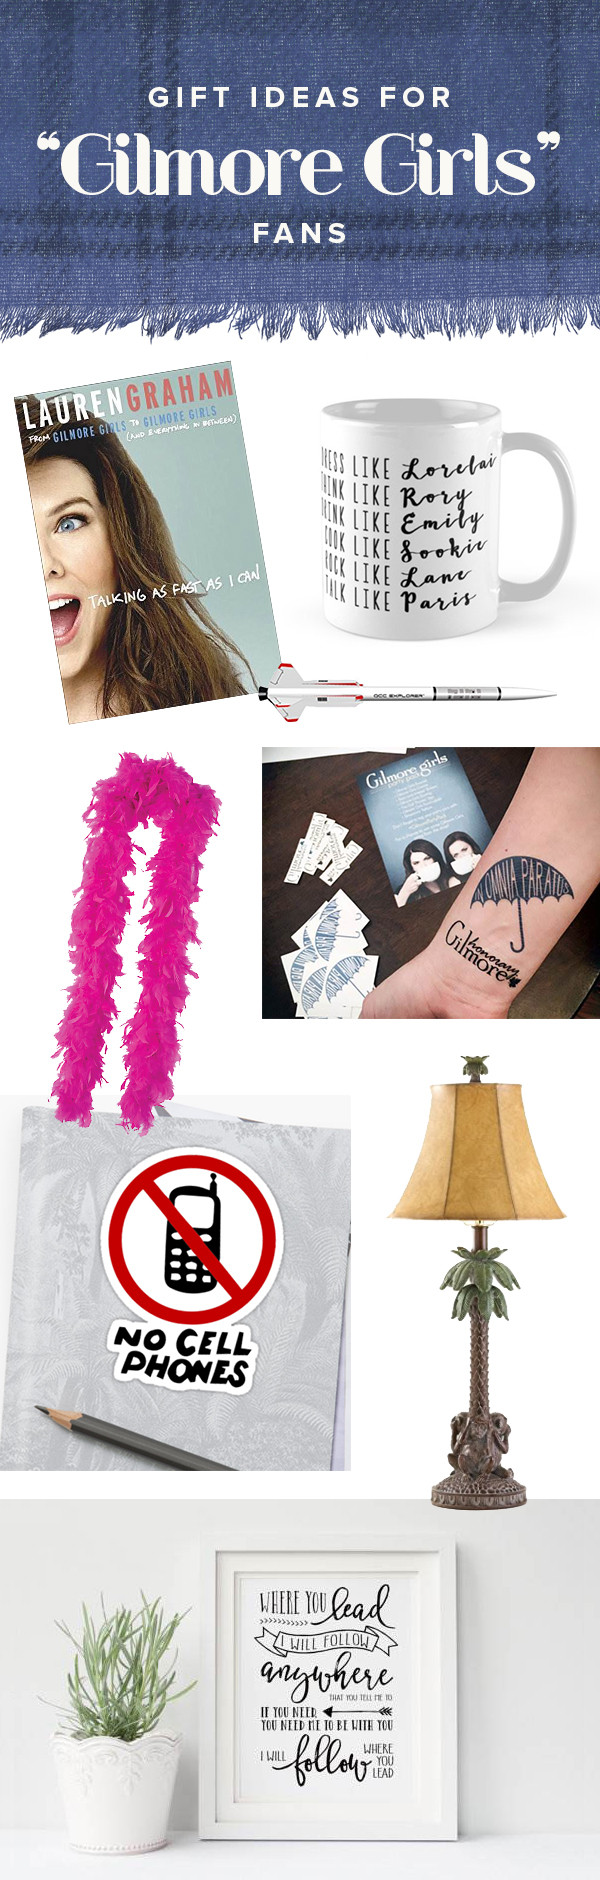 Gilmore Girls Gift Ideas
 15 perfect t ideas for fans of Gilmore Girls With